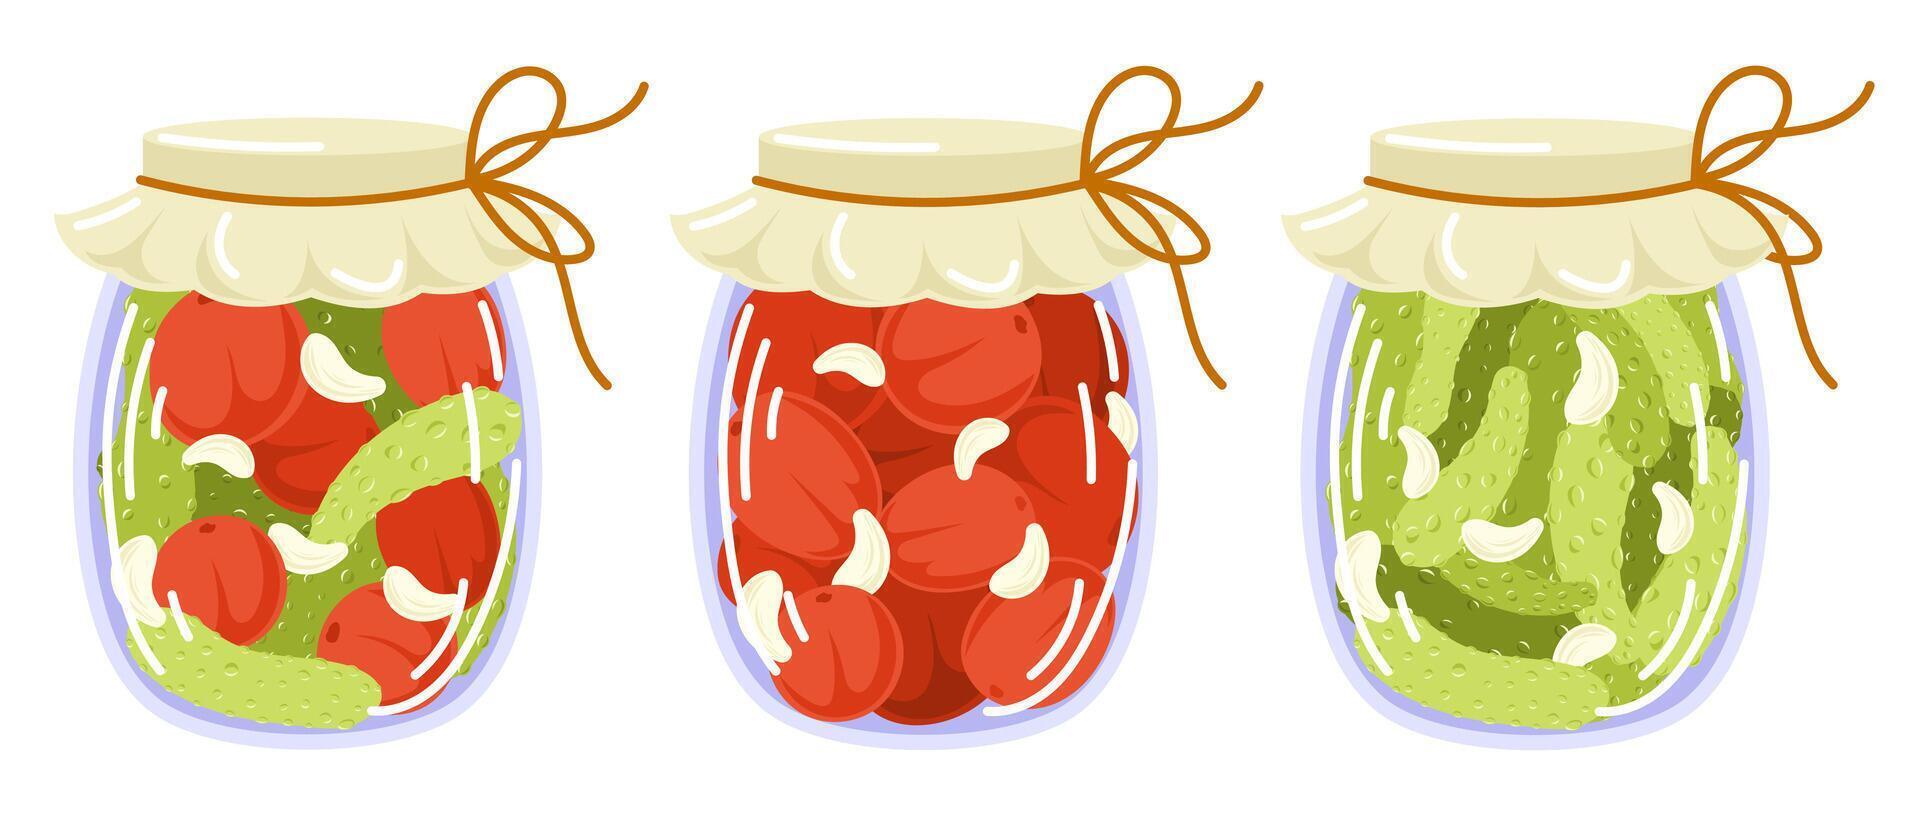 Pickled vegetables set in flat style. Marinated cucumber, tomatoes, garlic. Autumn marinate food. Vector illustration isolated on a white background.